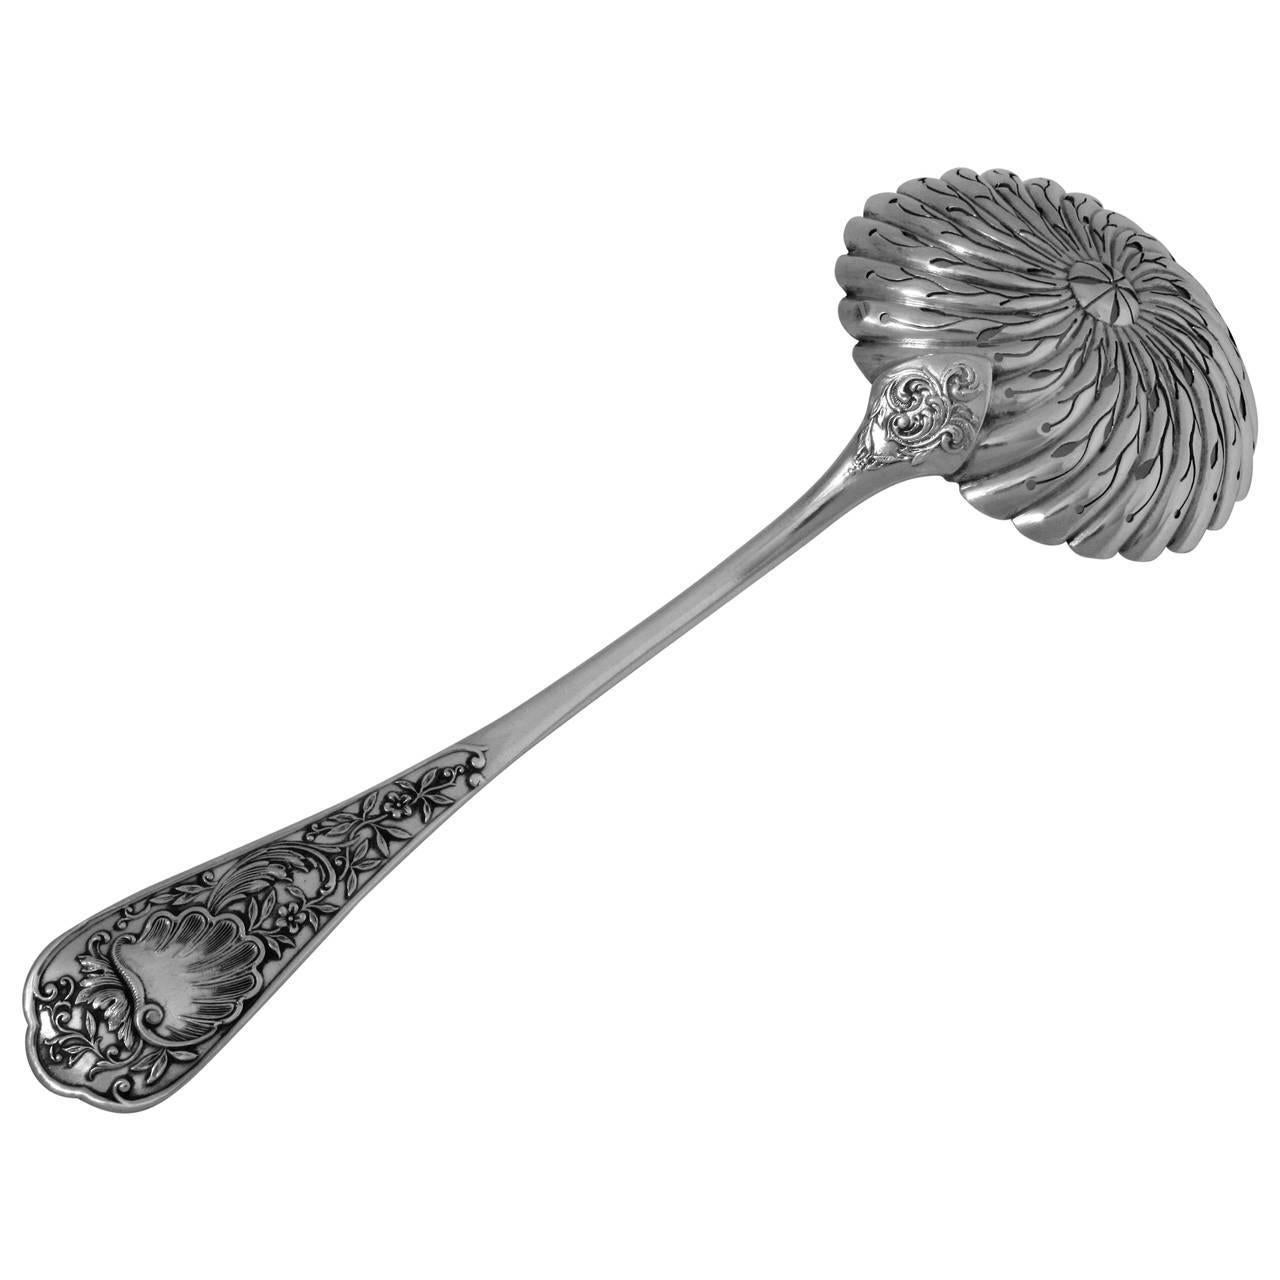 Boulenger Fabulous French All Sterling Silver Sugar Sifter Spoon Rococo 2